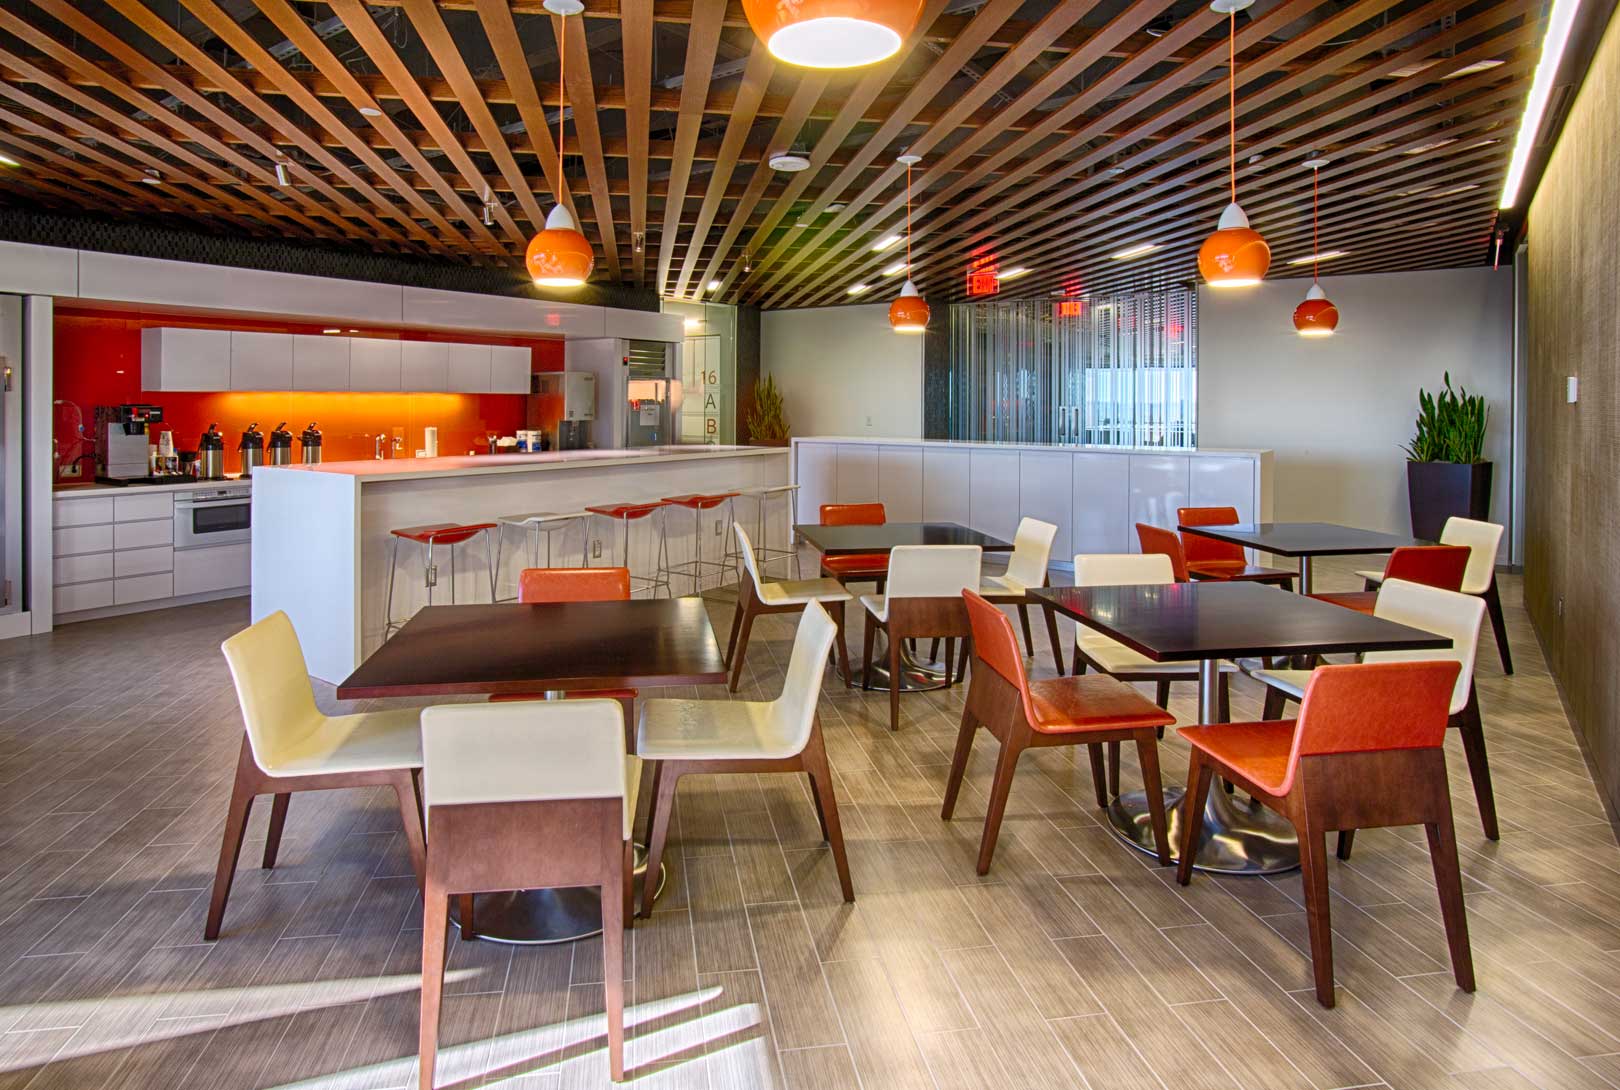 modern designed employee kitchen and break room space with accents of wood, and orange and white colors